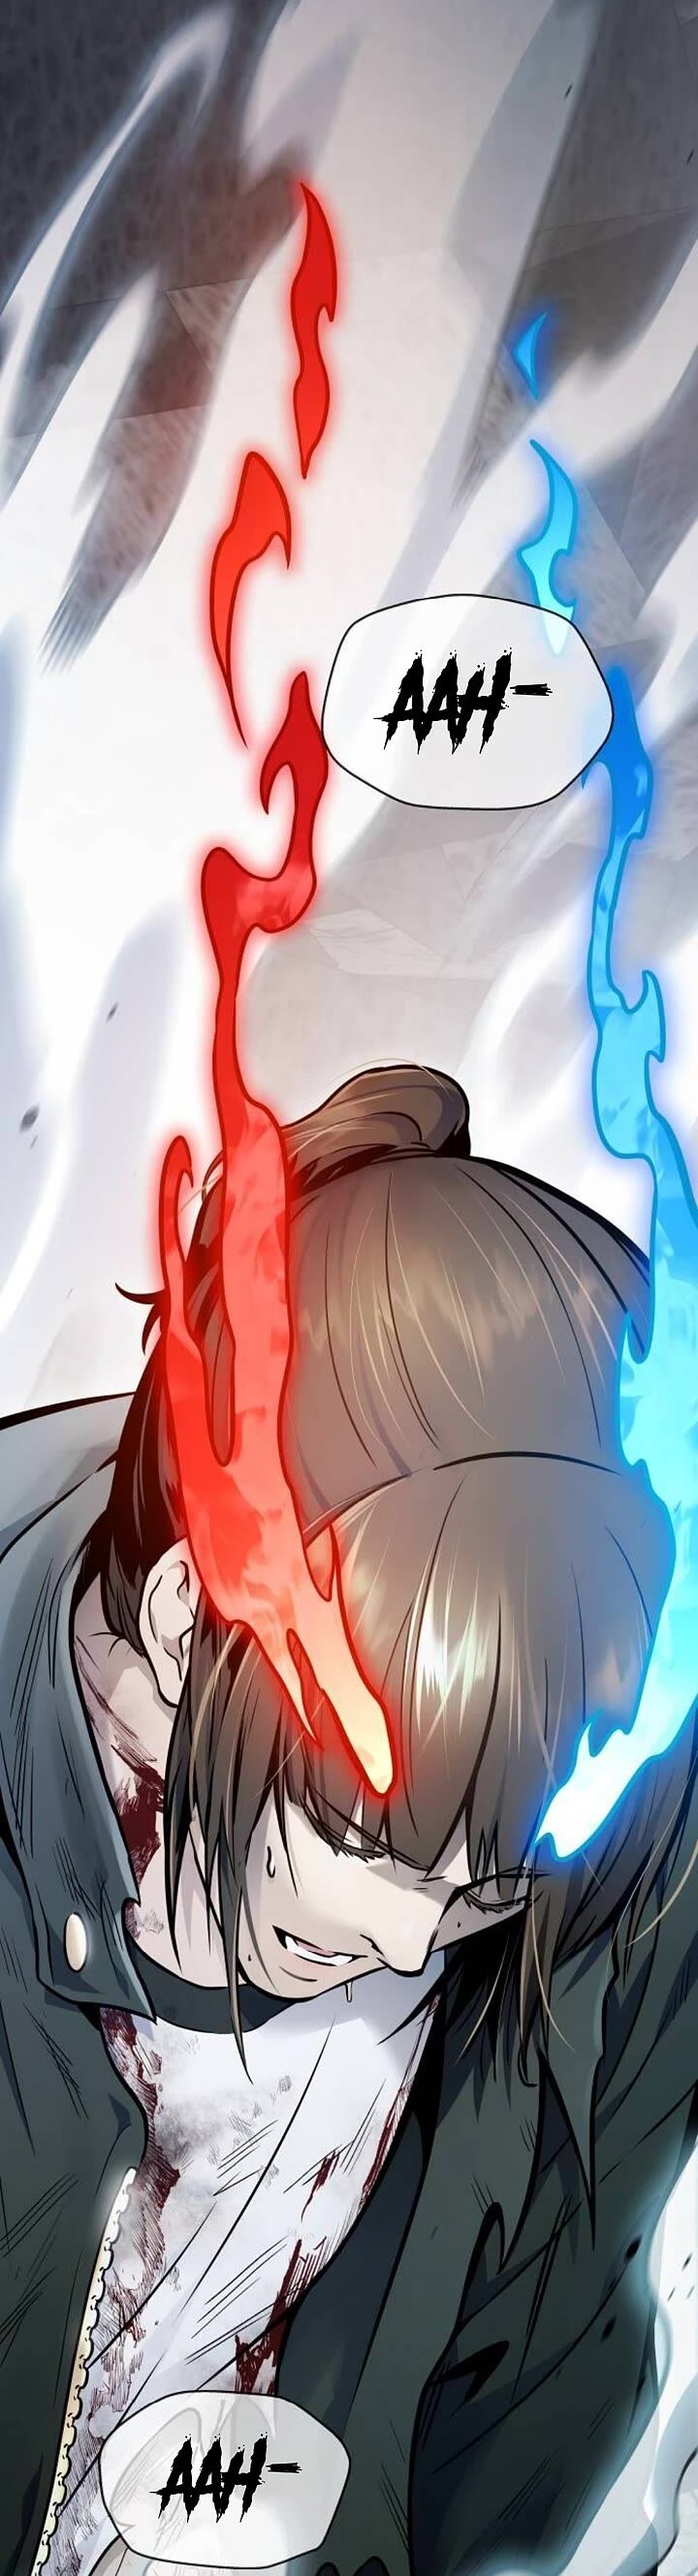 Tower Of God 624 62